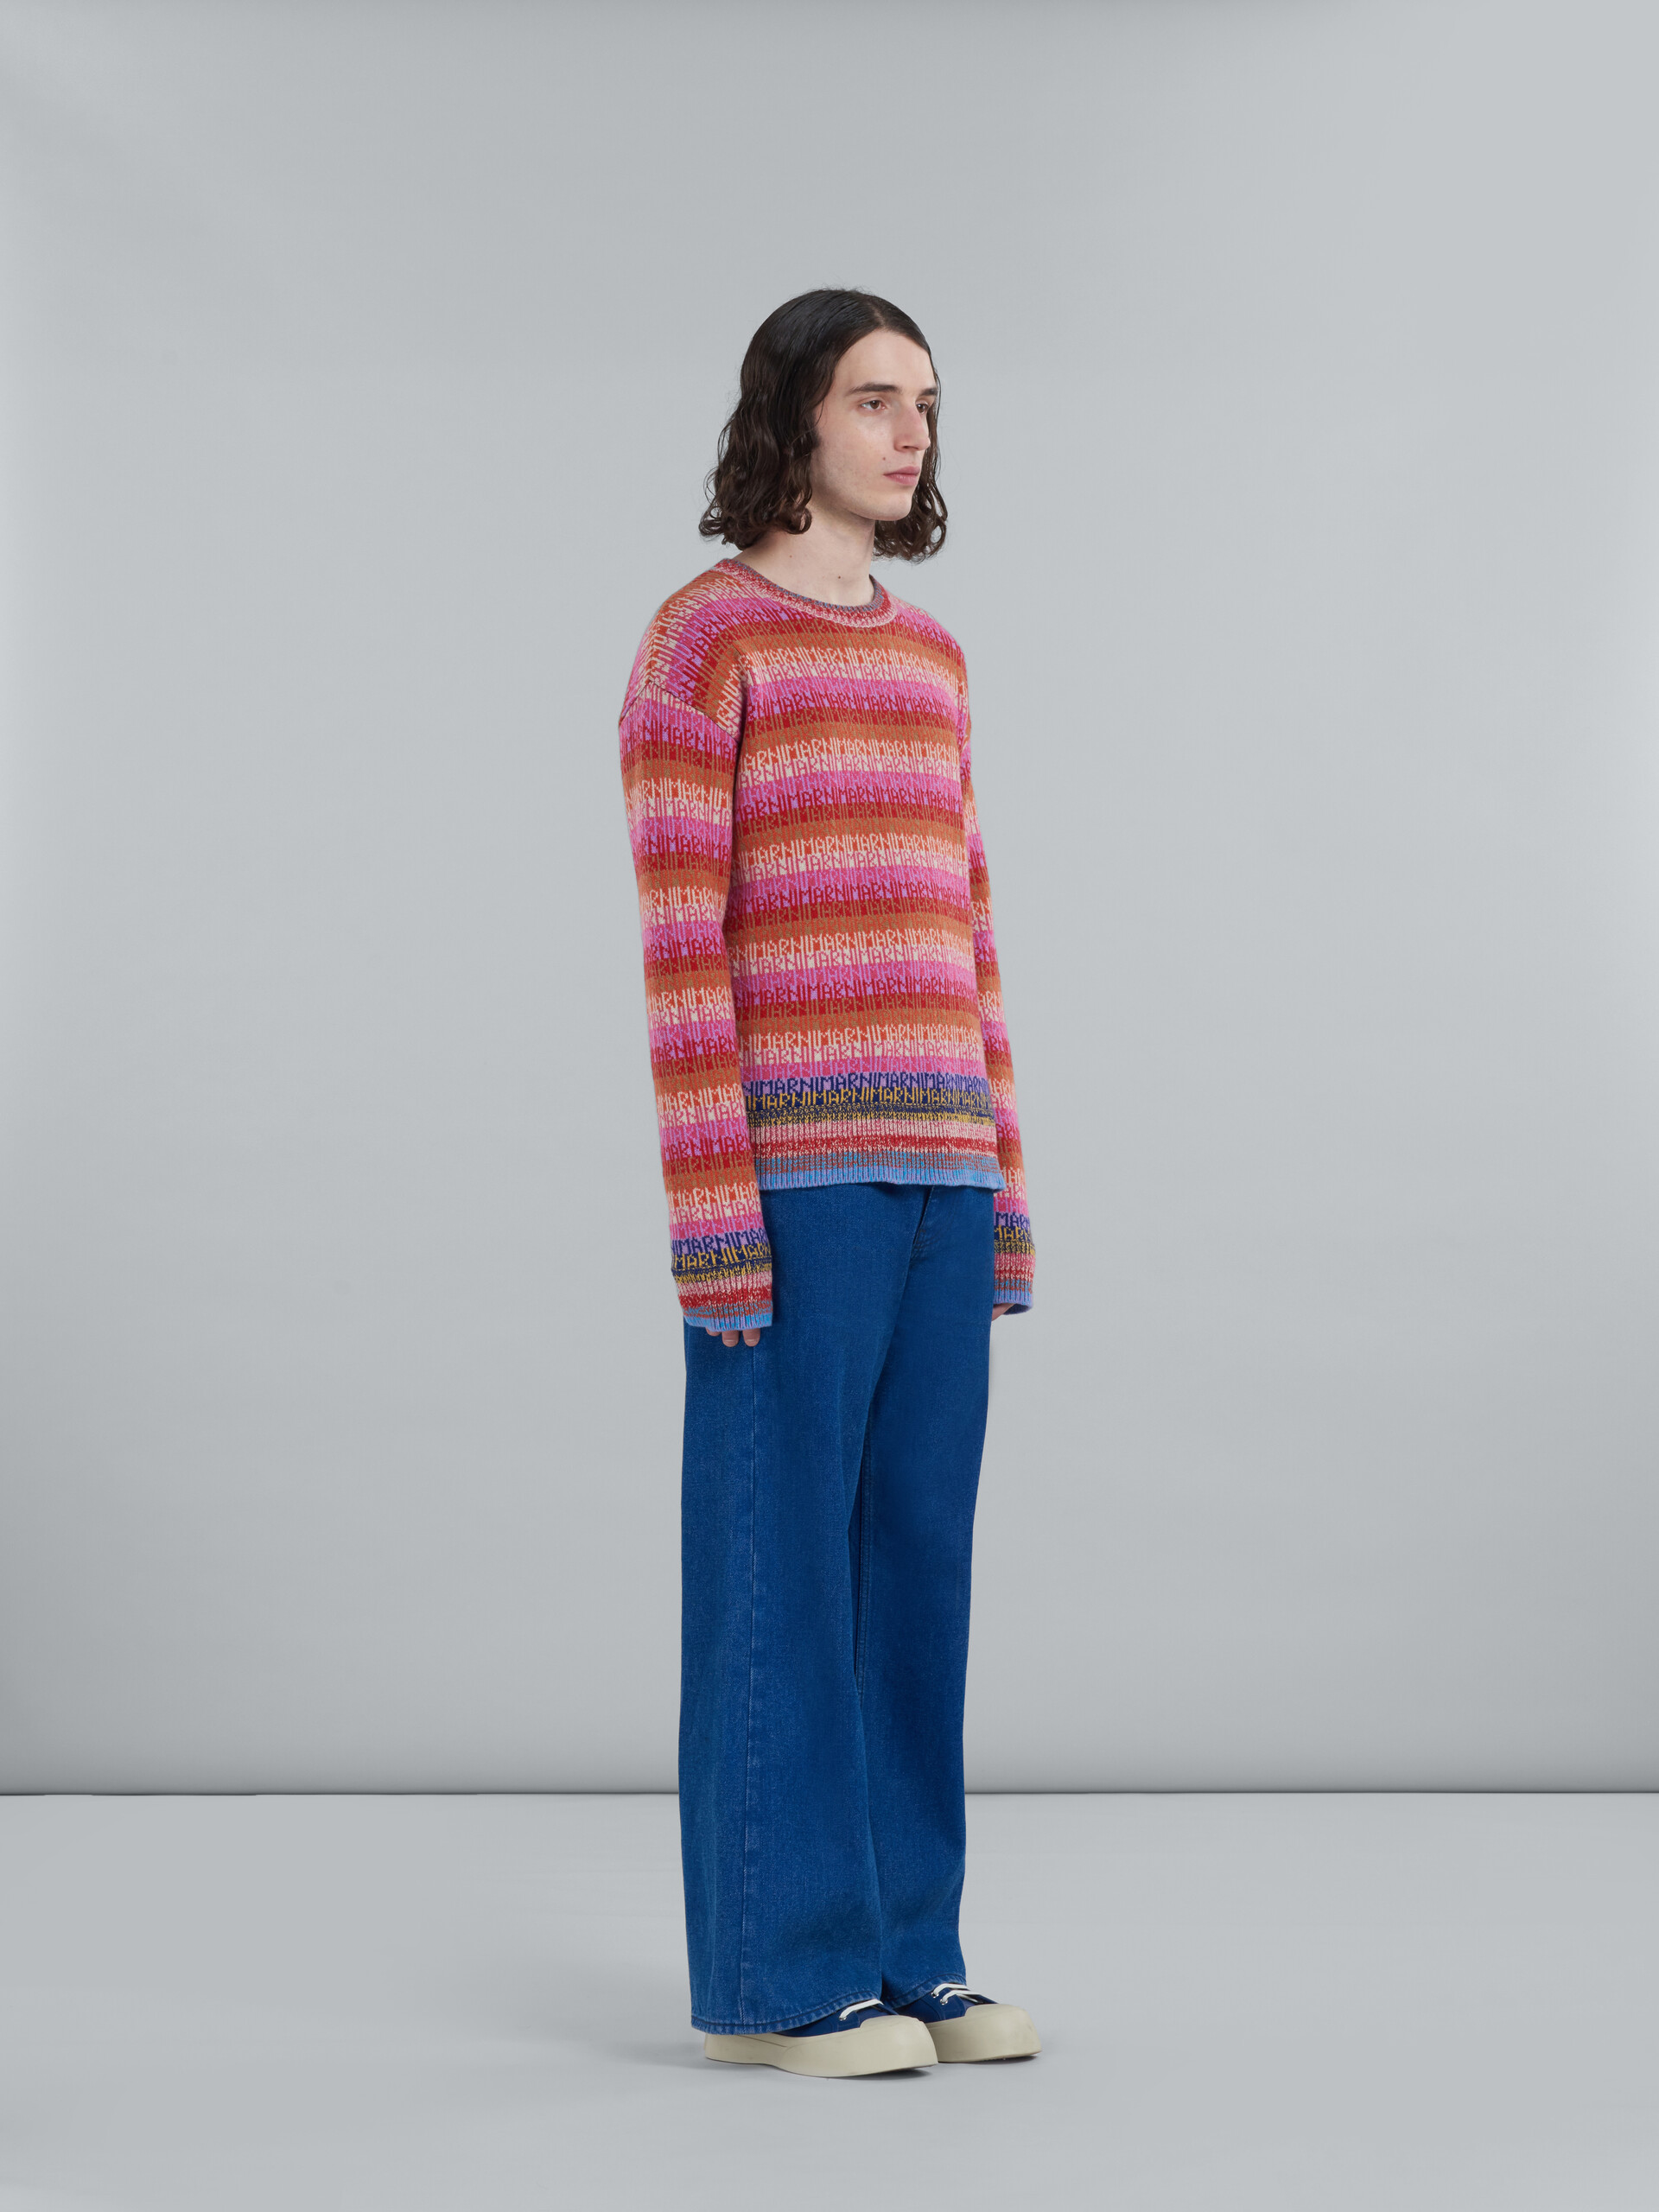 Wool top with multicolour stripes and jacquard logo - Pullovers - Image 5